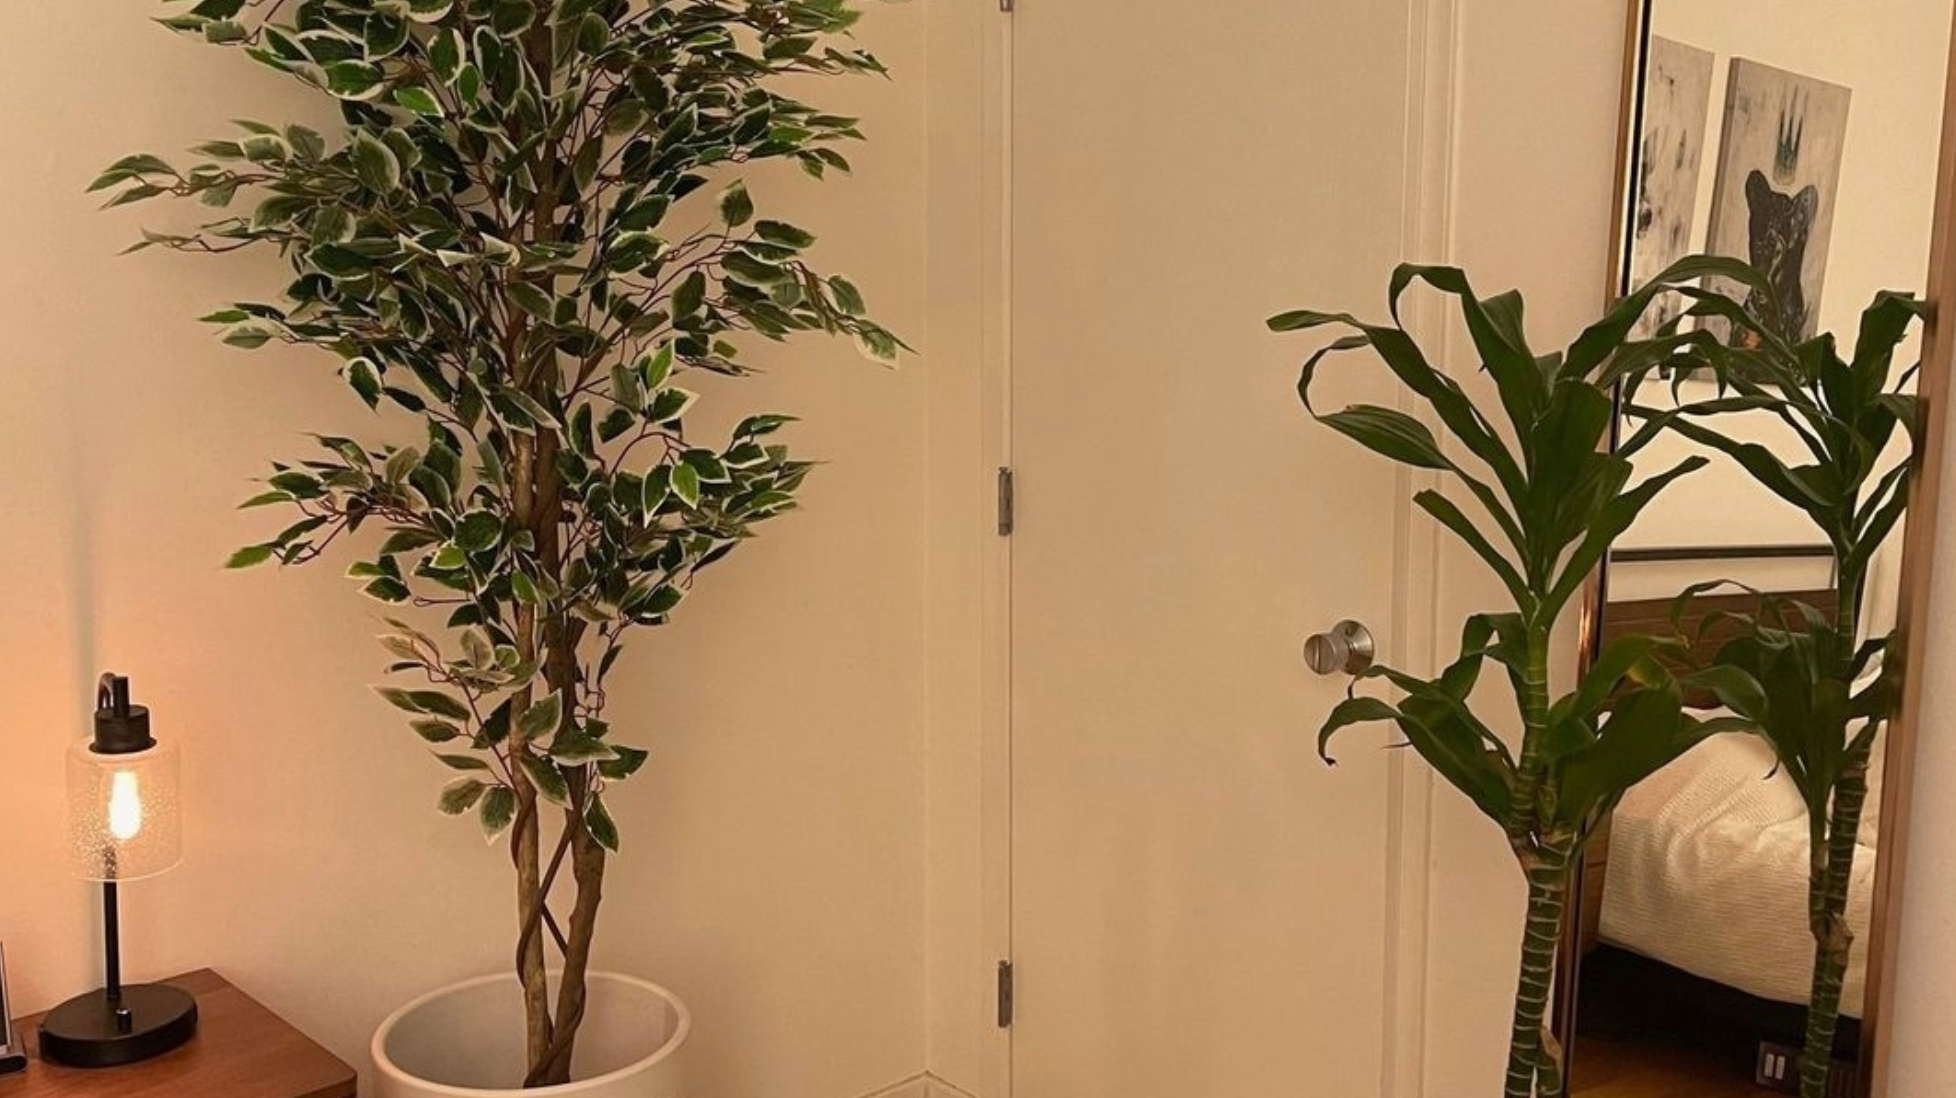 How To Create A Basic Artificial Plant Garden Wall For Your Condo Or Room